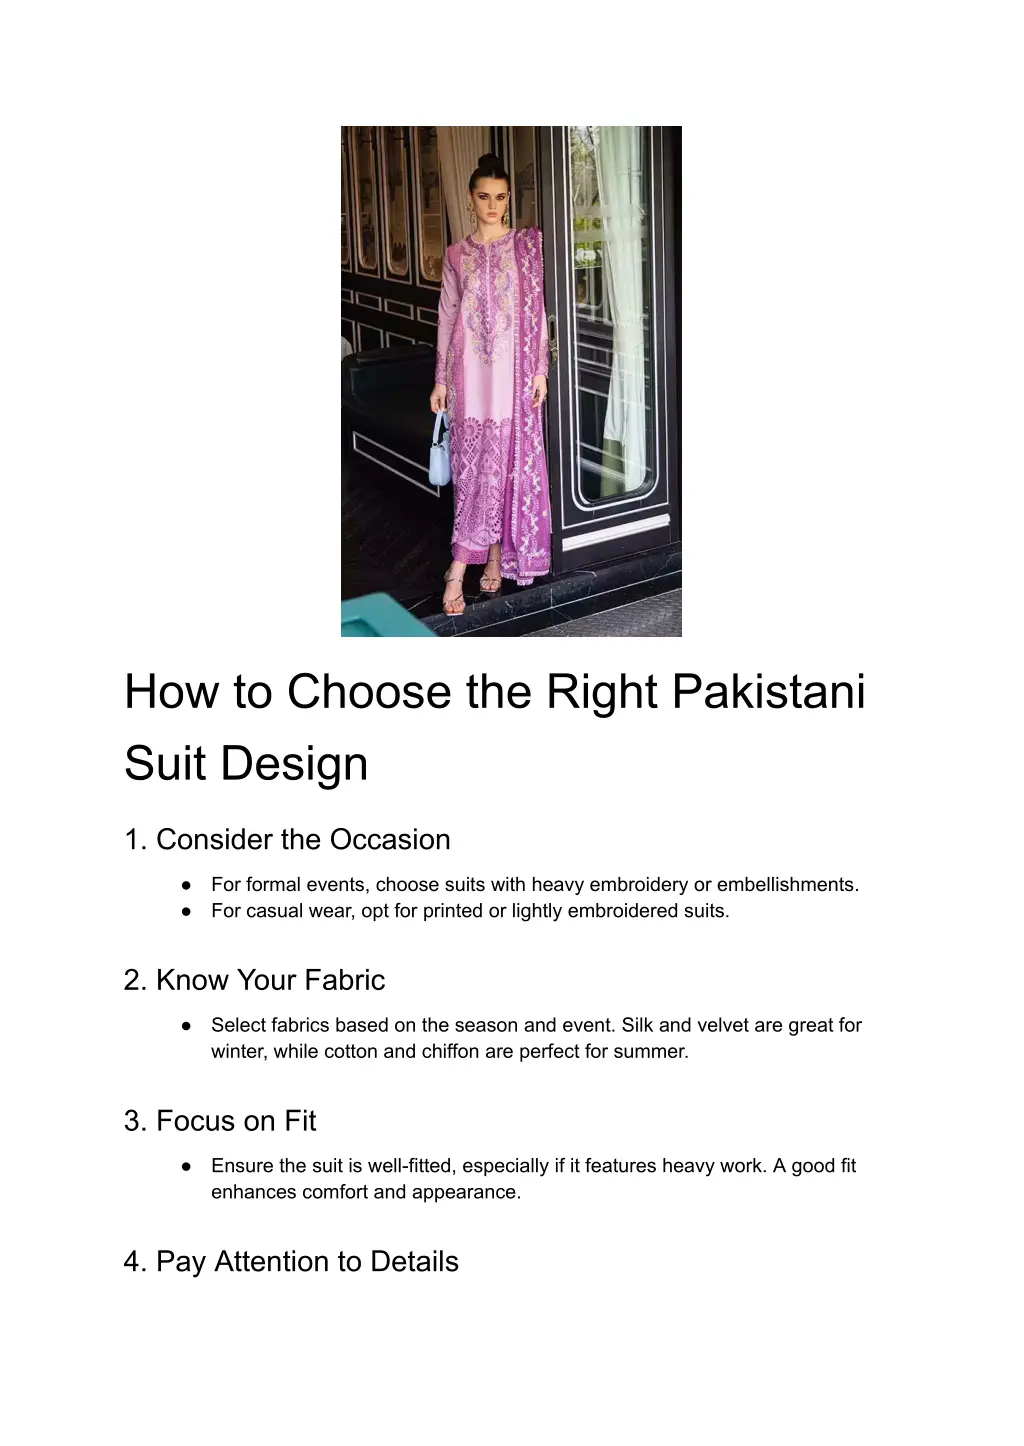 how to choose the right pakistani suit design